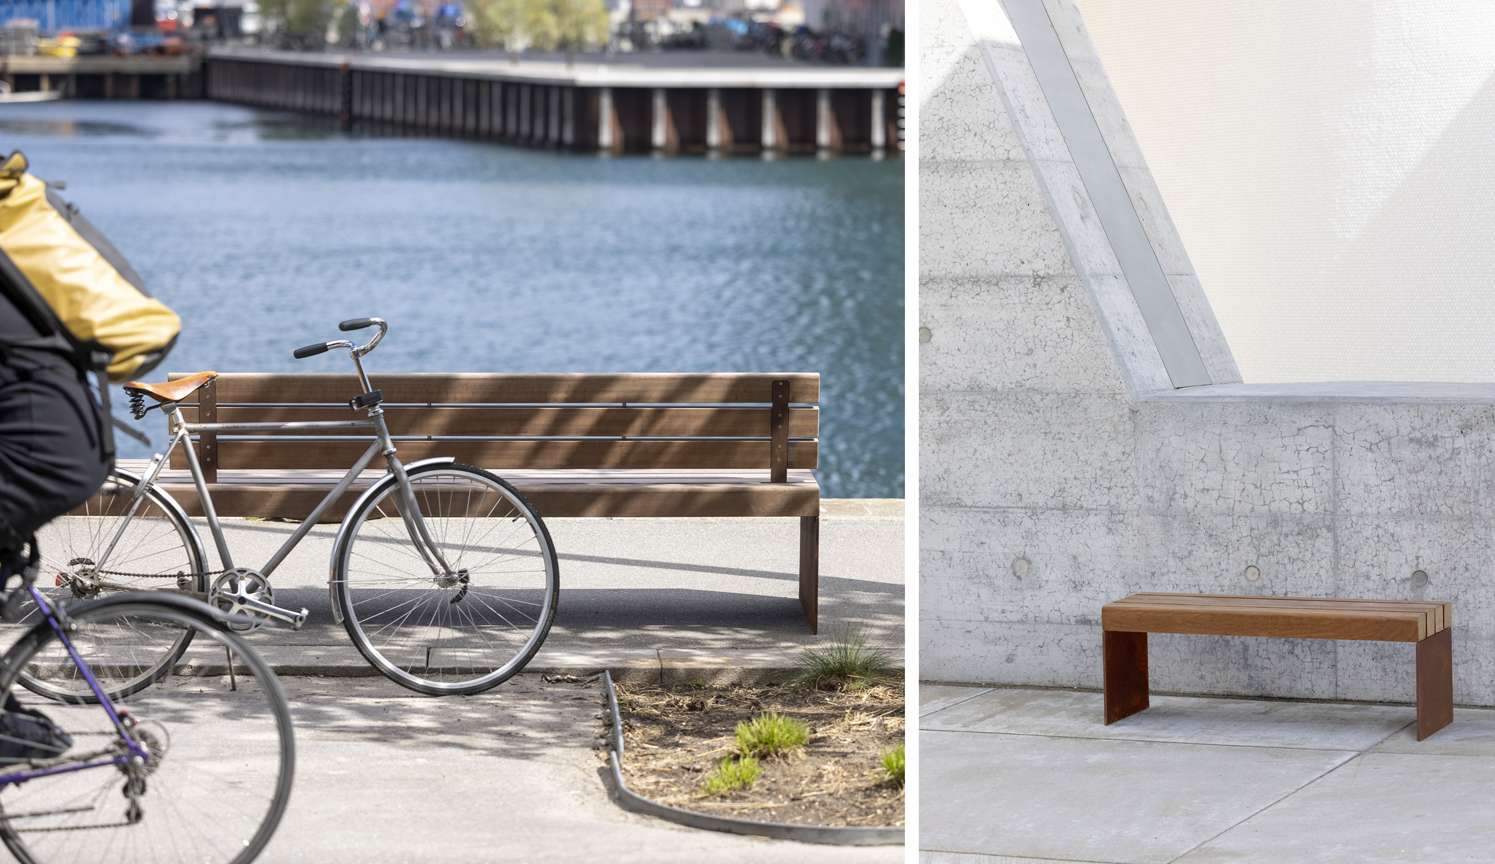 New range of urban furniture from Cobe architects